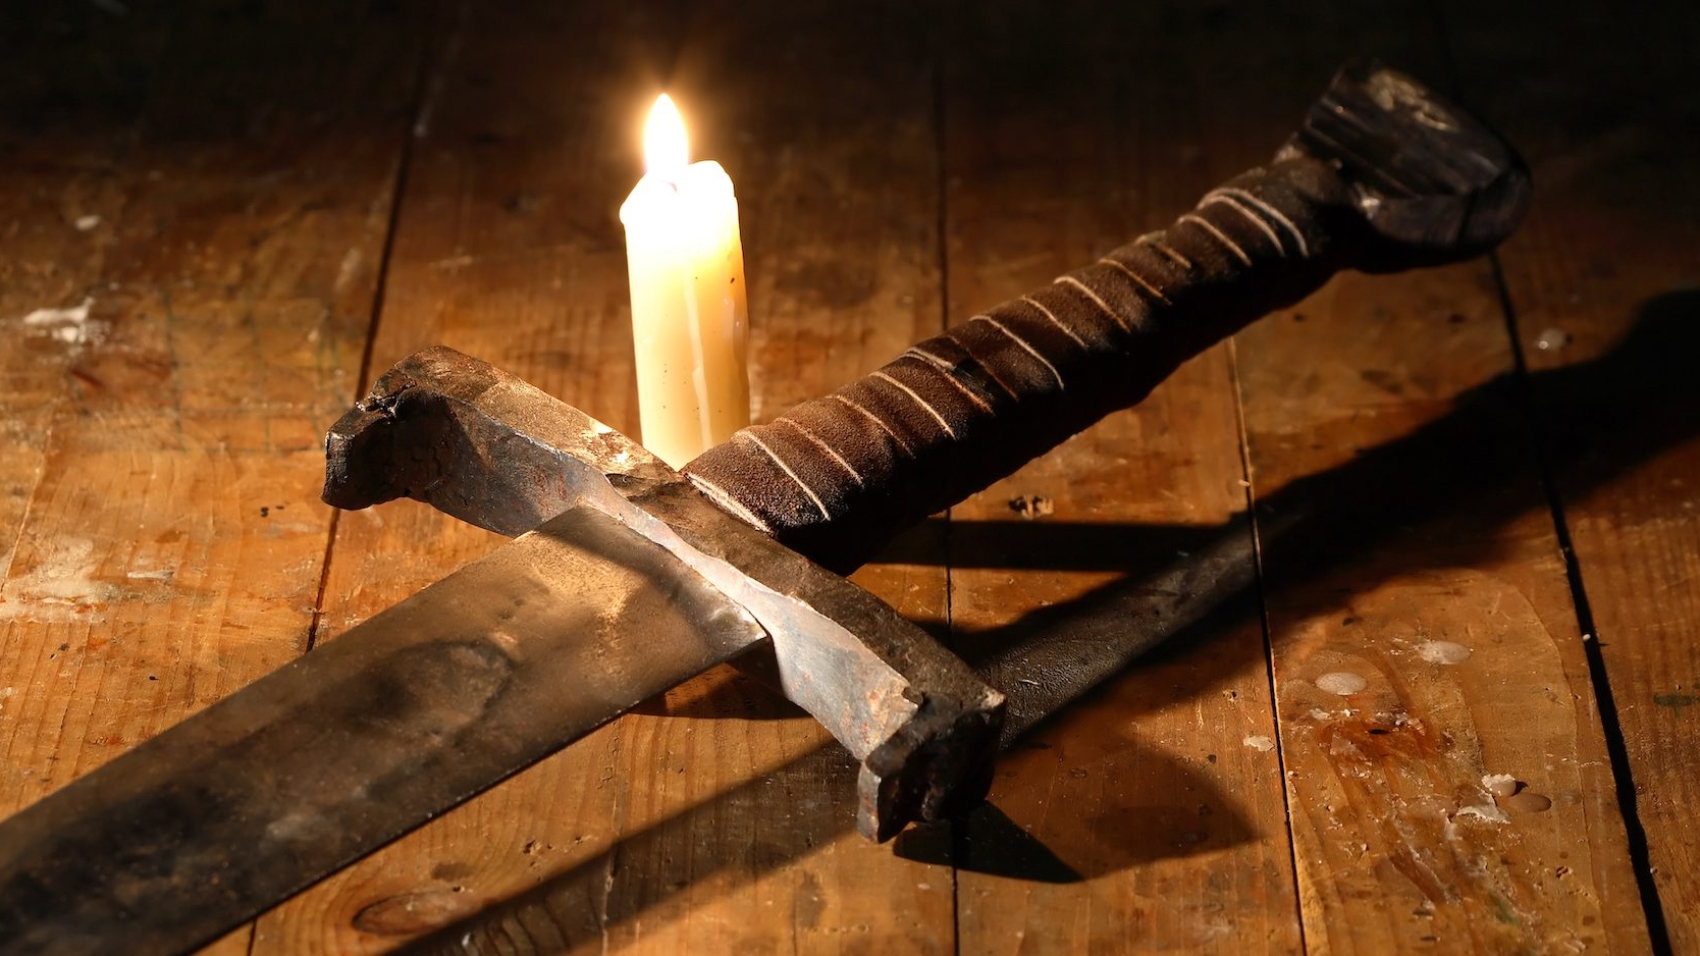 Vintage still-life with ancient sword near lighting candle on wooden board